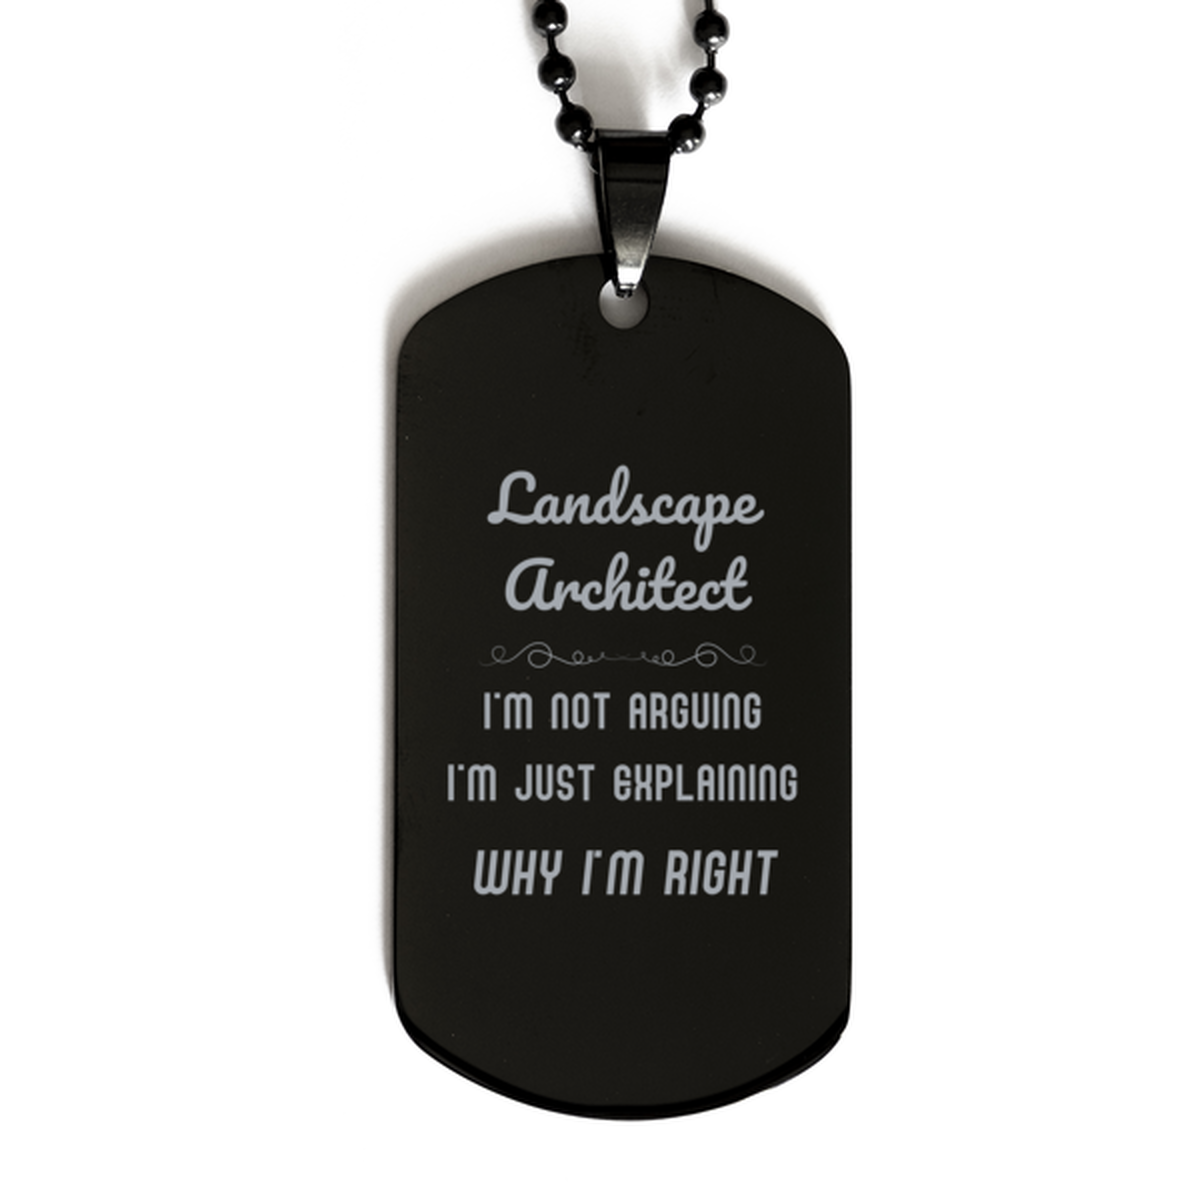 Landscape Architect I'm not Arguing. I'm Just Explaining Why I'm RIGHT Black Dog Tag, Funny Saying Quote Landscape Architect Gifts For Landscape Architect Graduation Birthday Christmas Gifts for Men Women Coworker